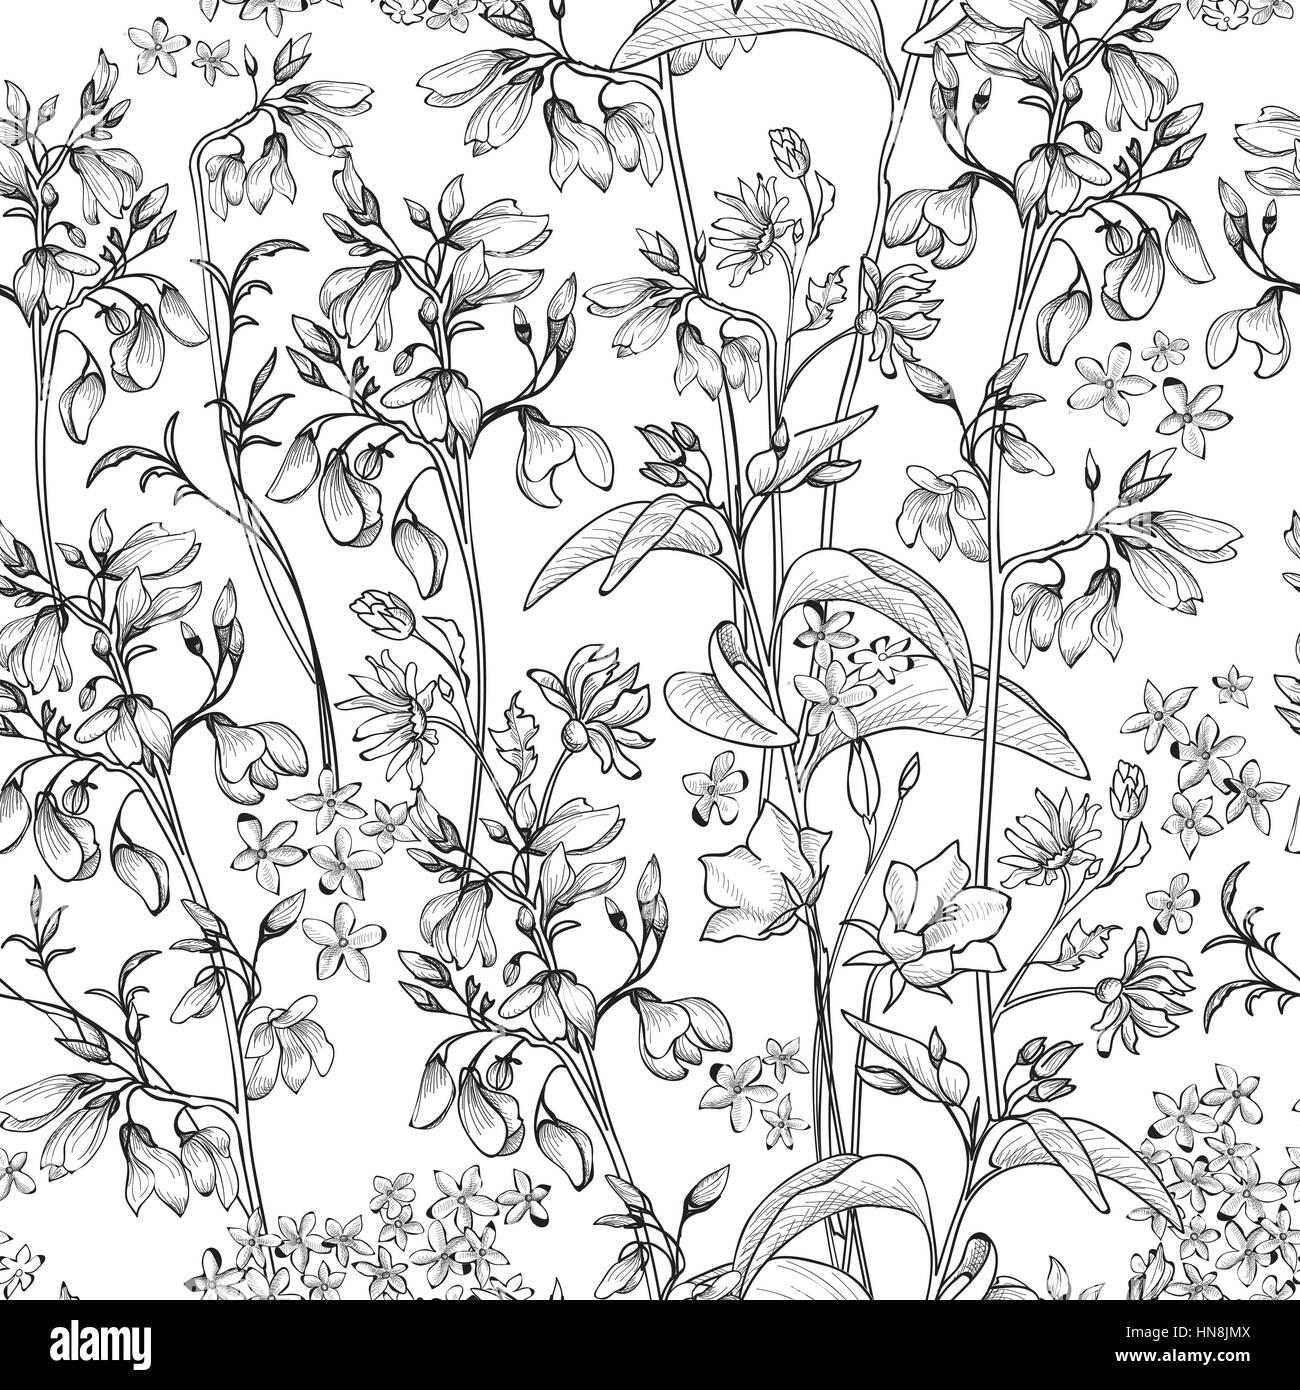 Floral seamless pattern. Flower background. Floral seamless texture with flowers. Stock Vector